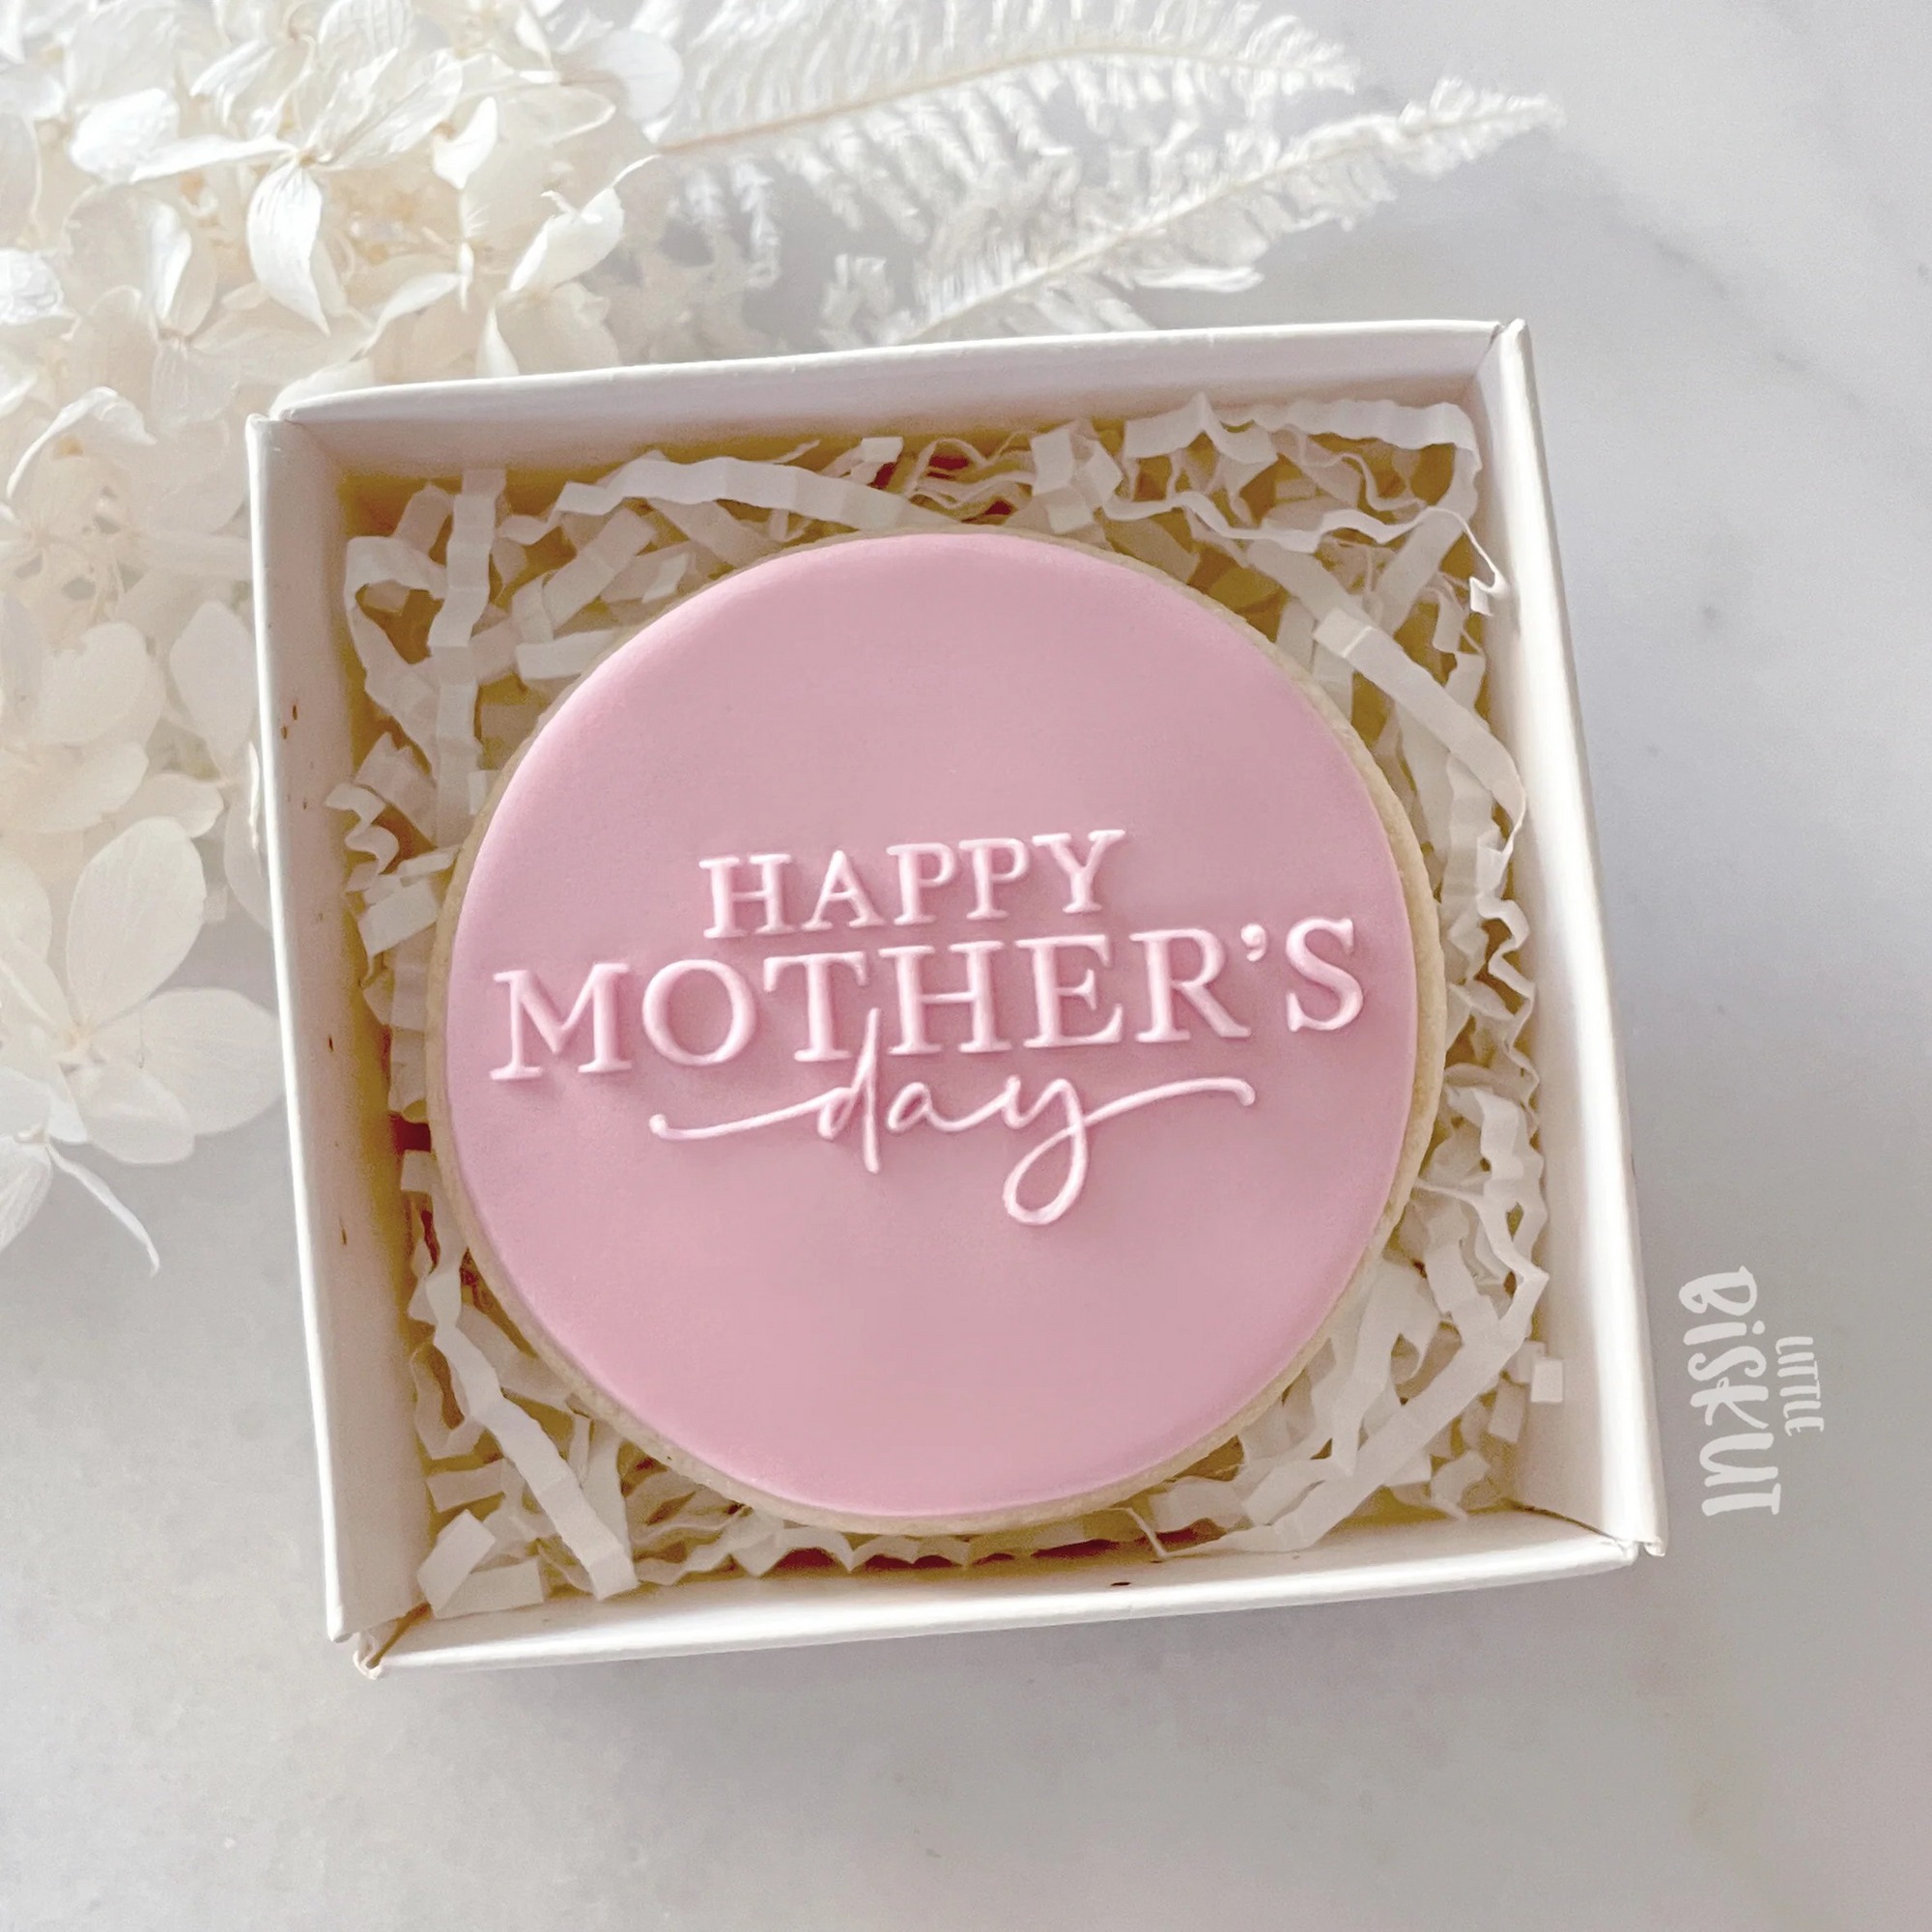 Happy Mothers Day Cookie Fondant Debosser by Little Biskut Level Up!